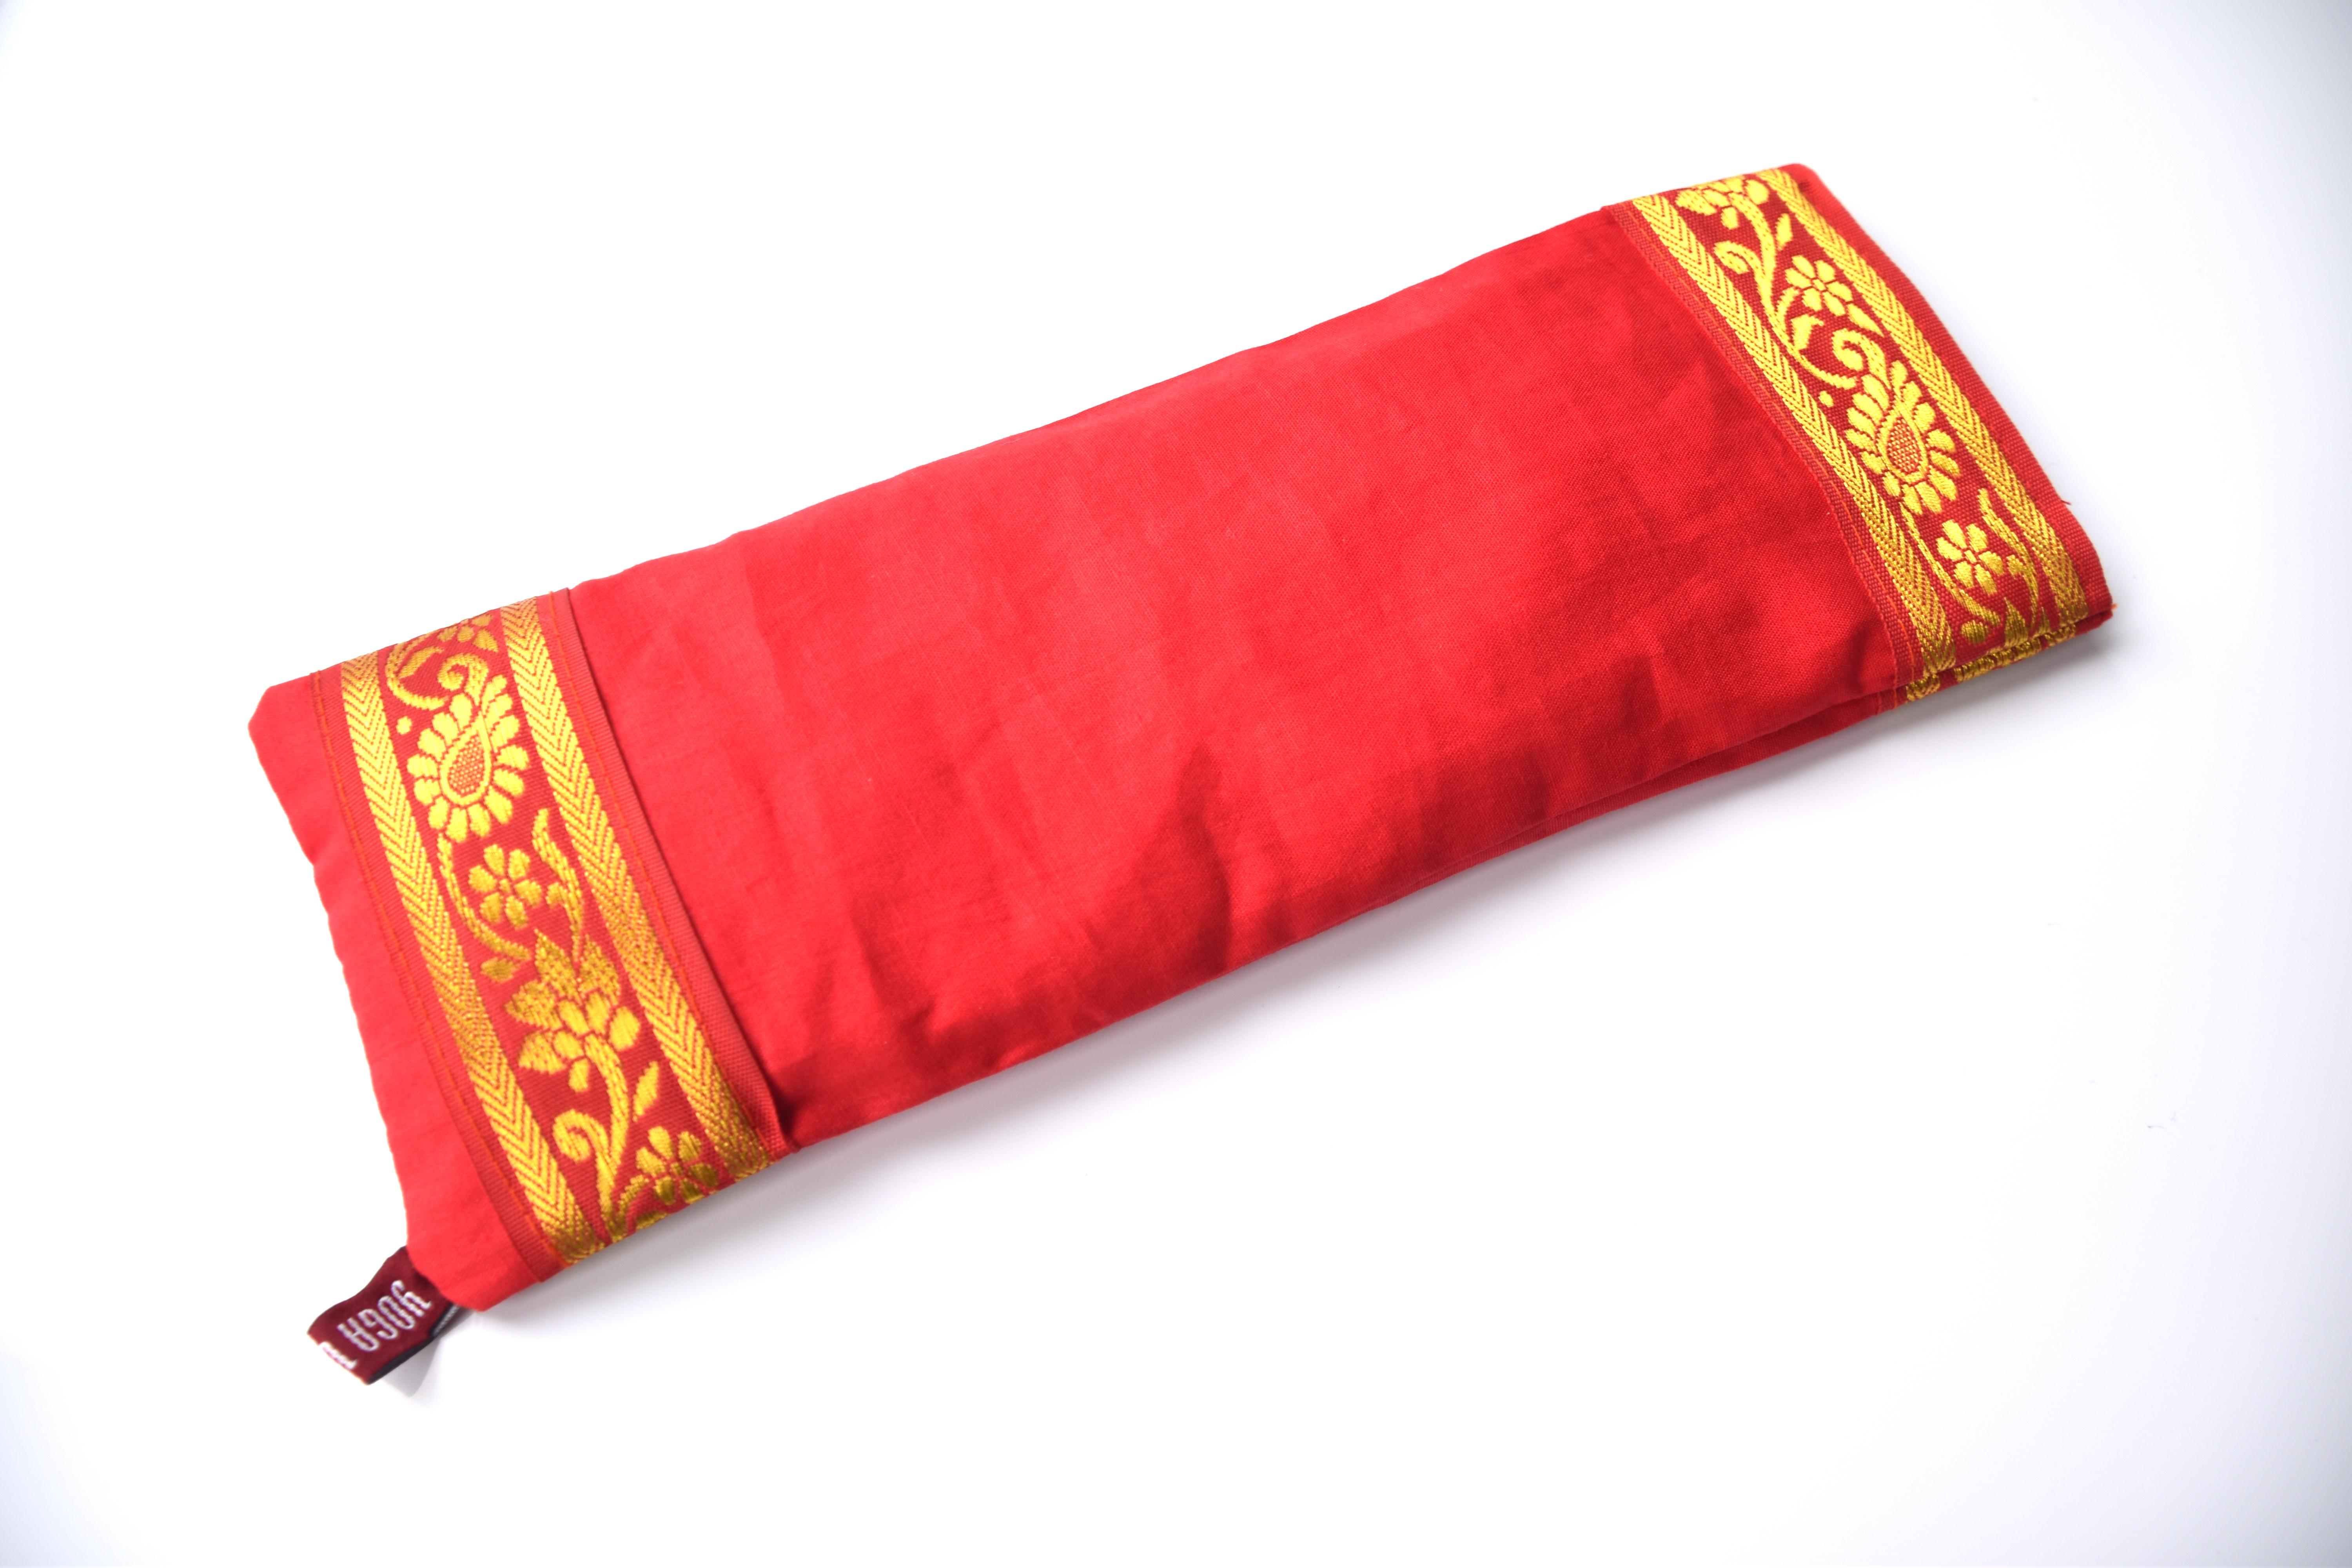 Yoga United lavender linseed eye pillow red